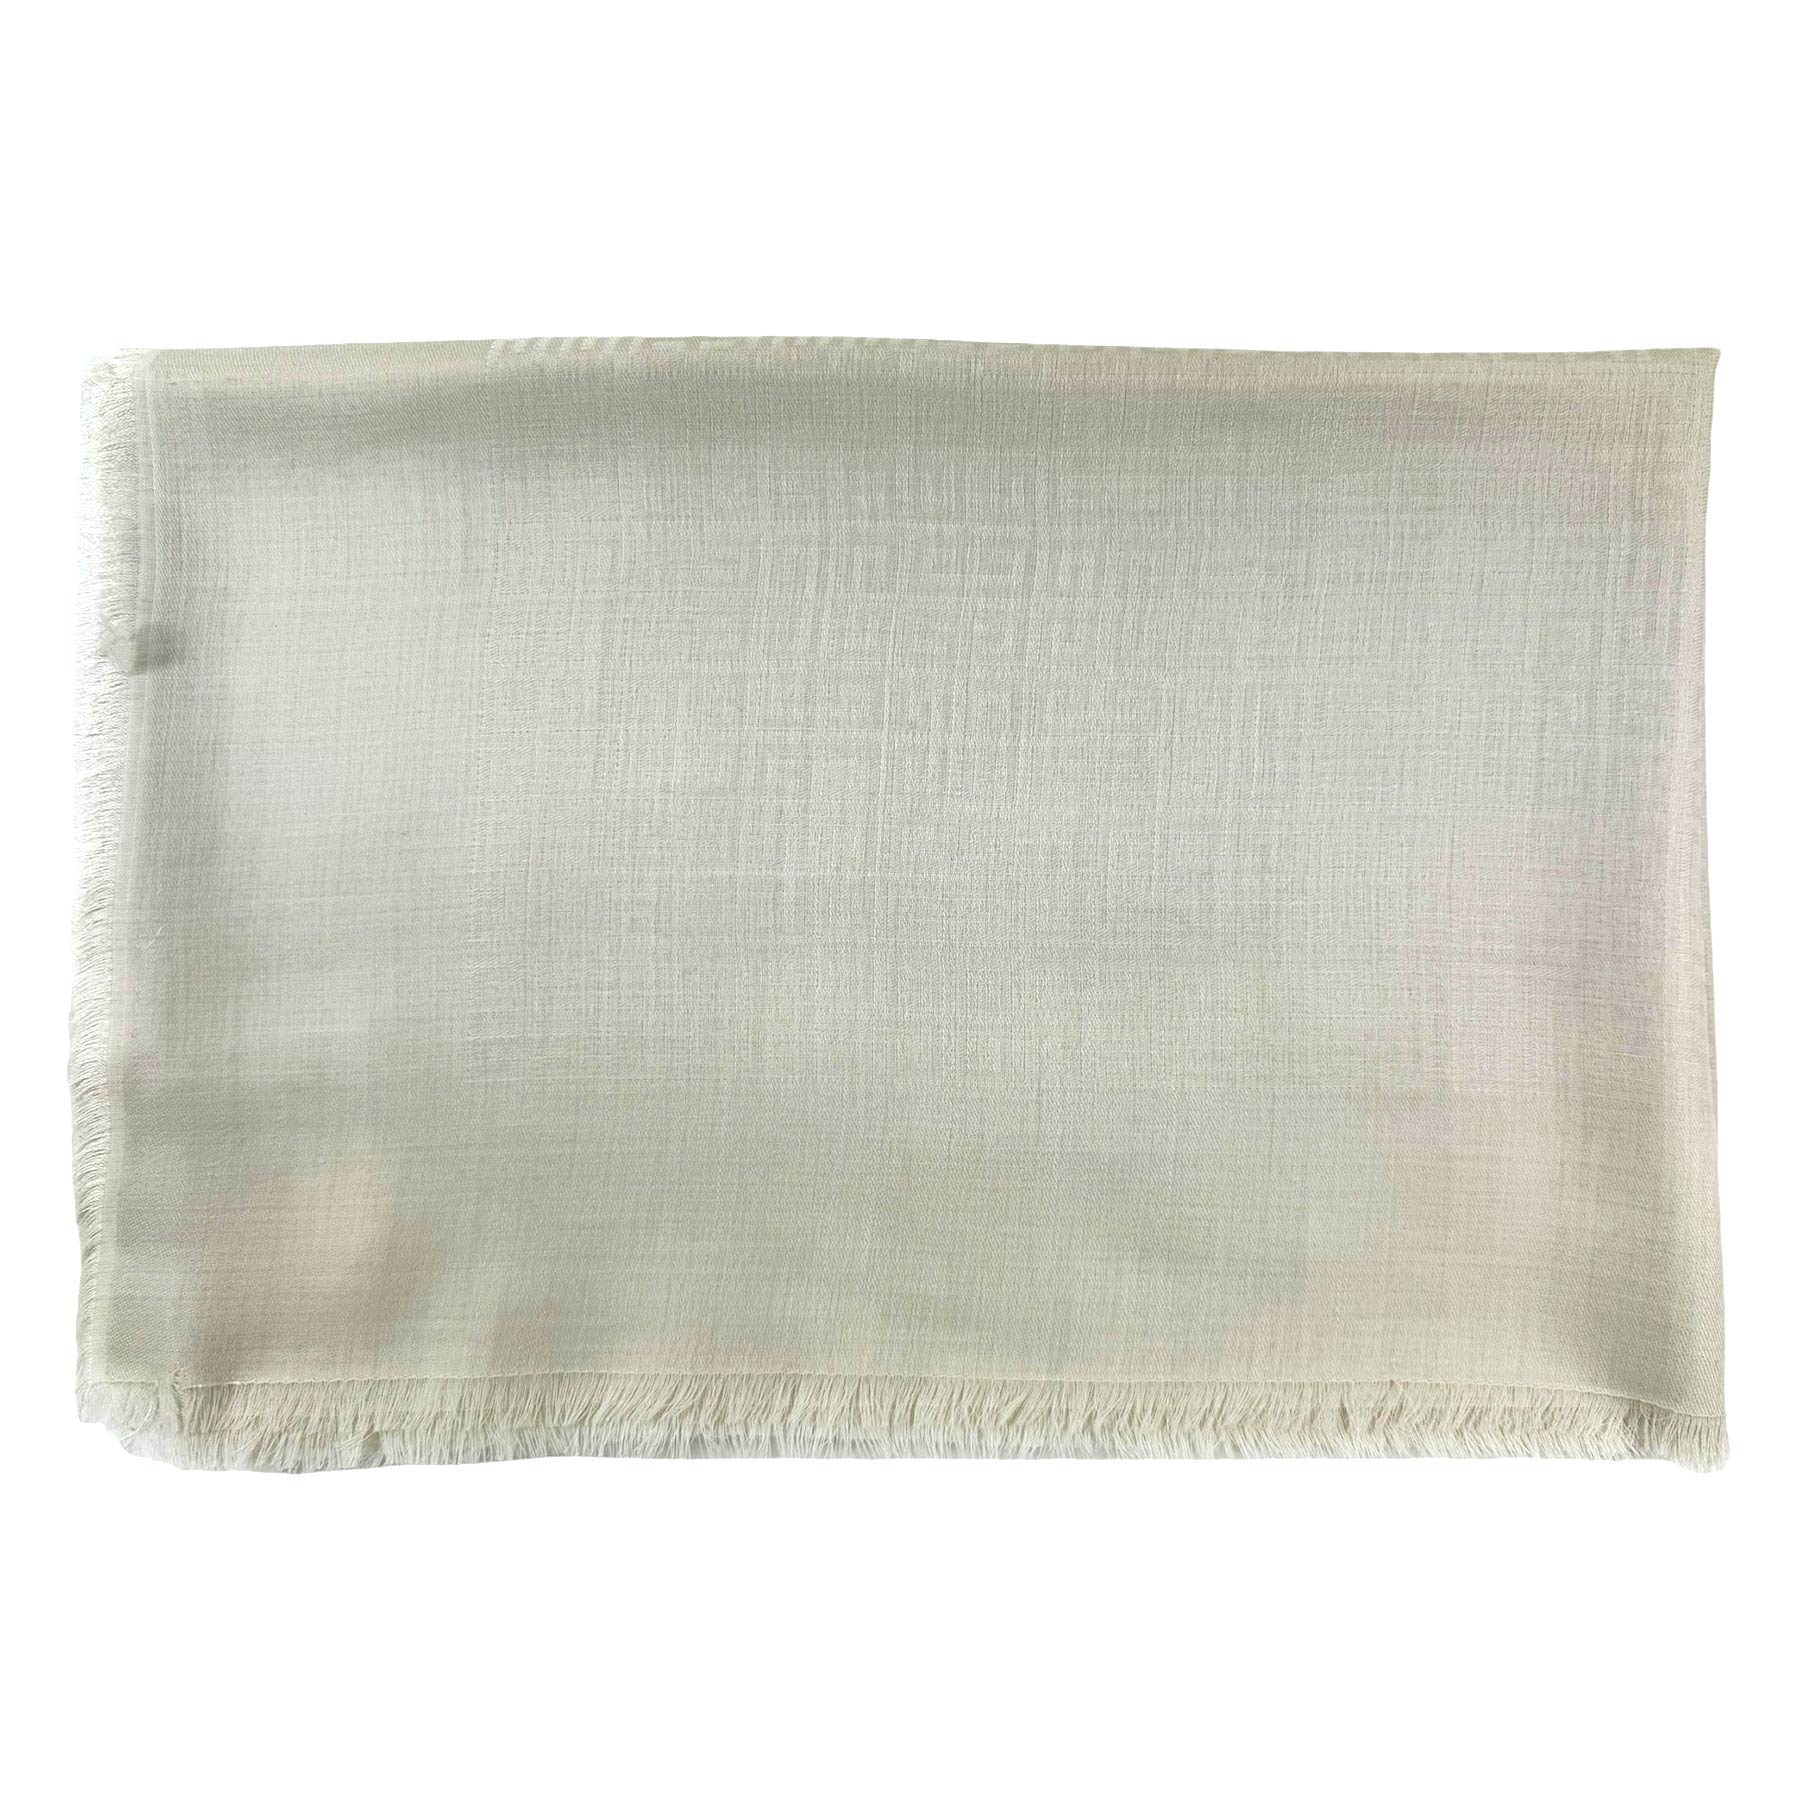 Givenchy Cashmere Scarf Beige White 4G 